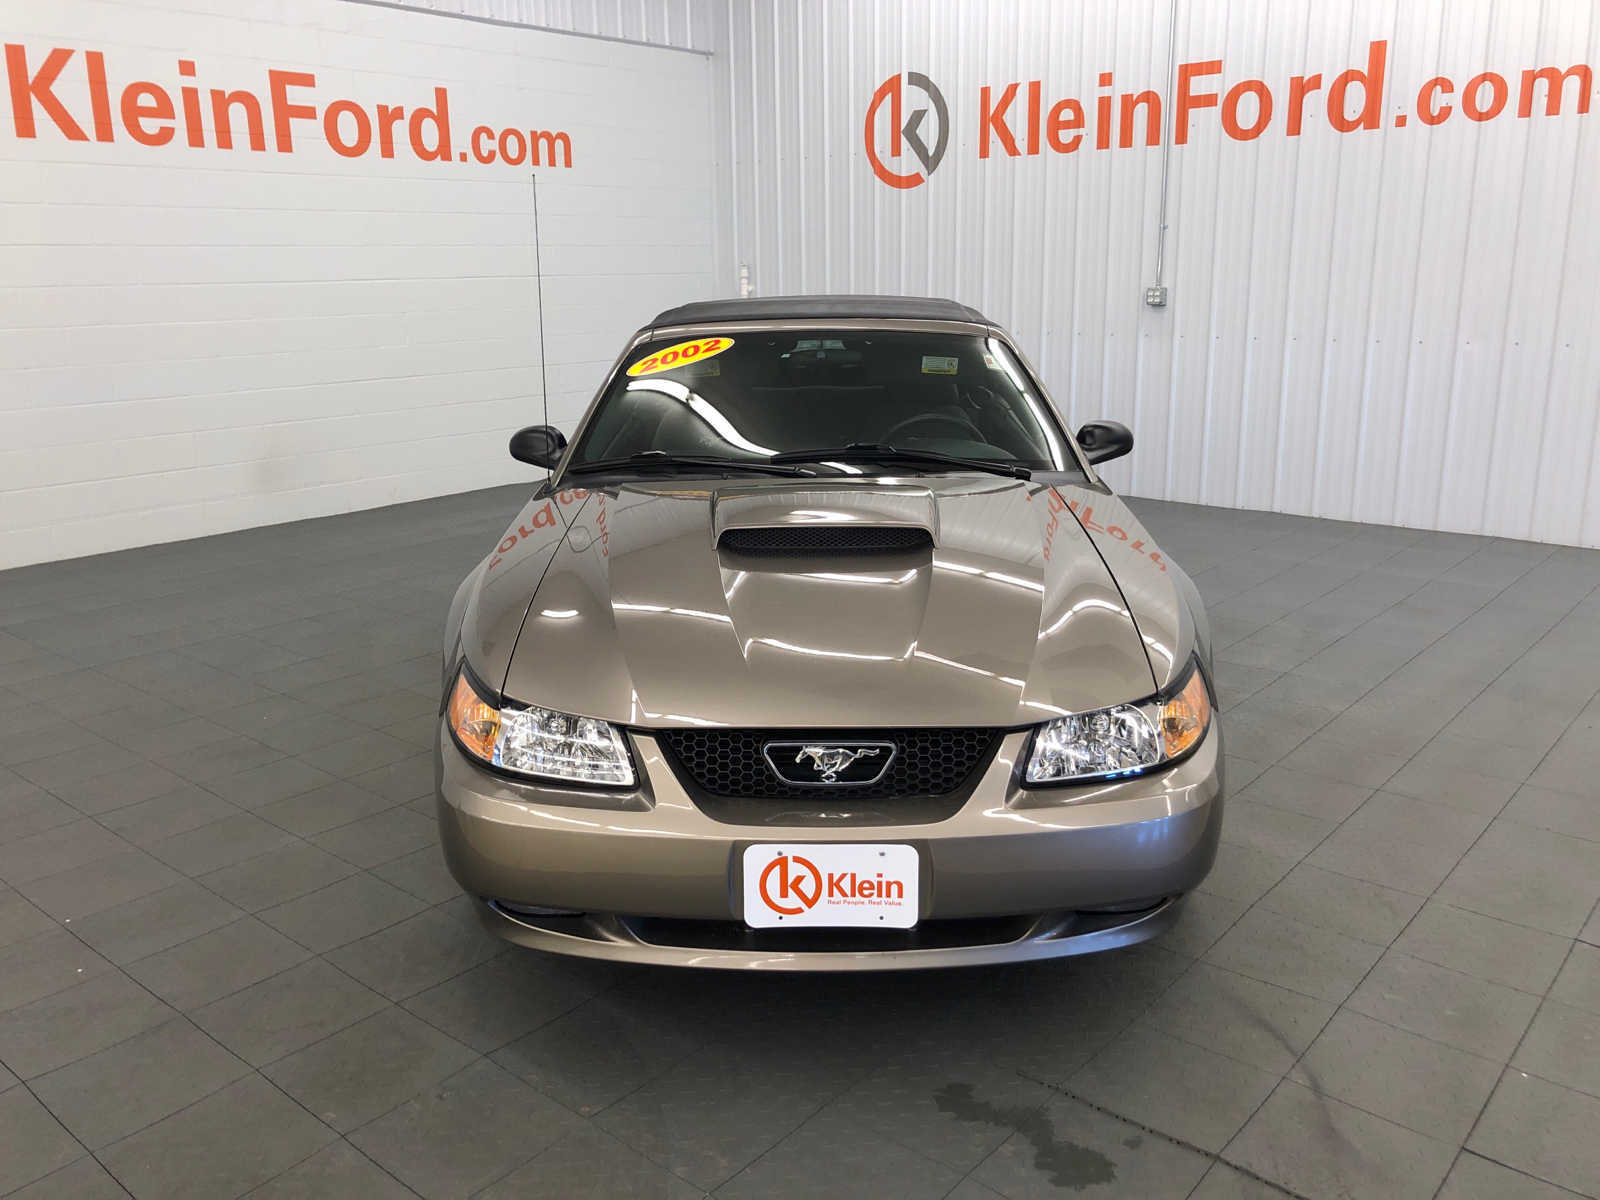 2002 Ford Mustang GT Deluxe 30